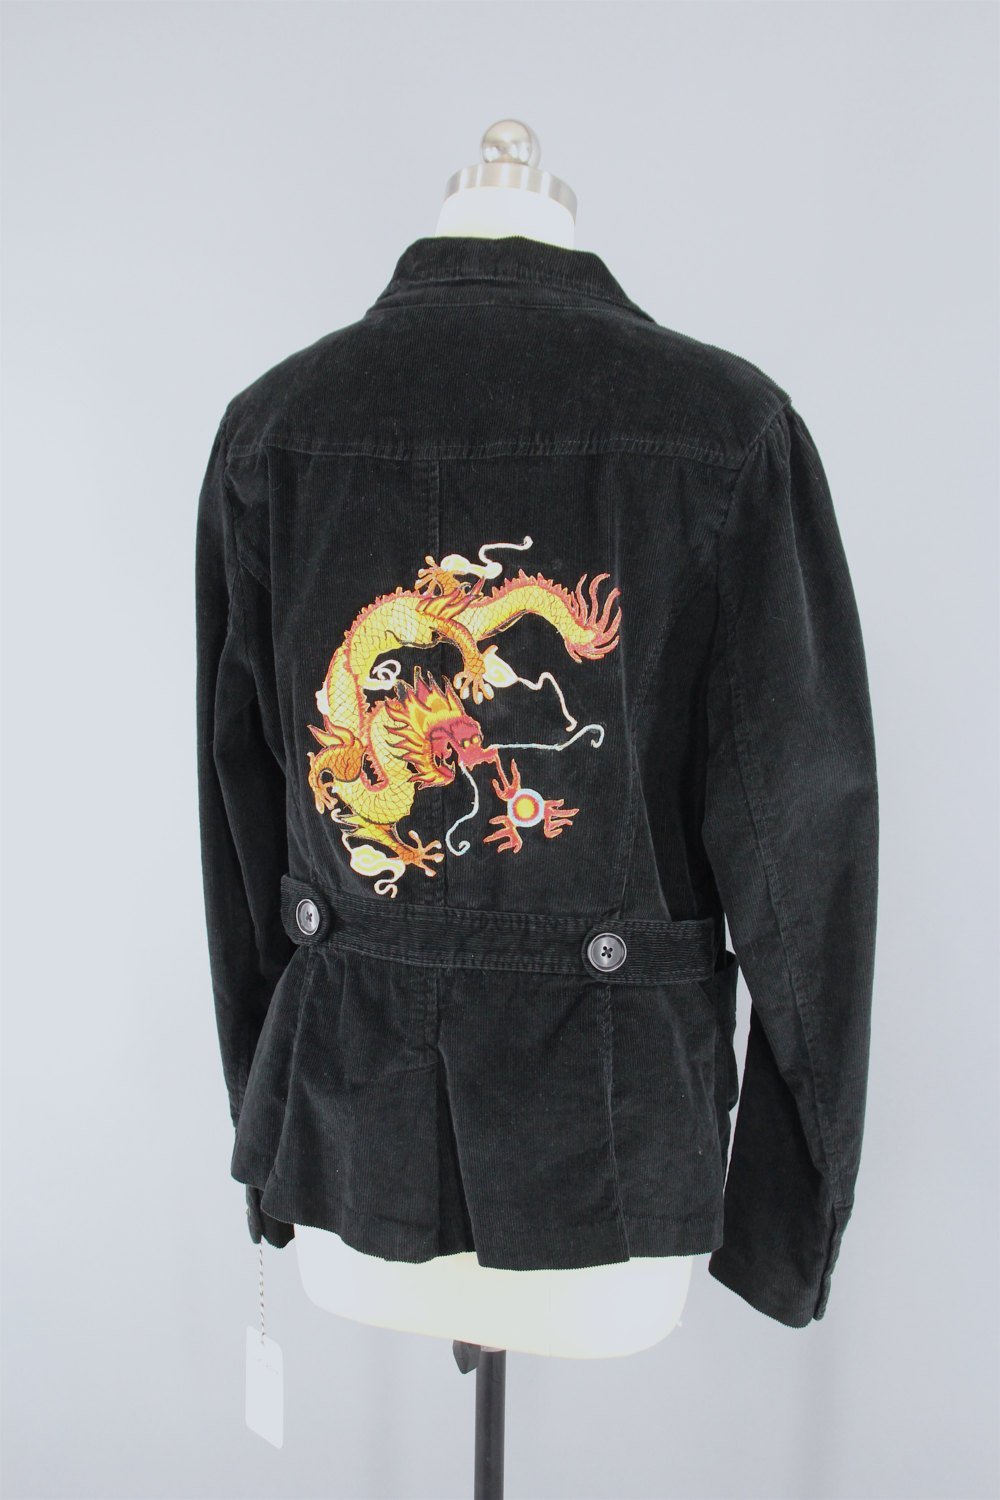 BLACK Corduroy Jacket with Golden Dragon Embroidered Patch - See Measurements / Blue - ThisBlueBird